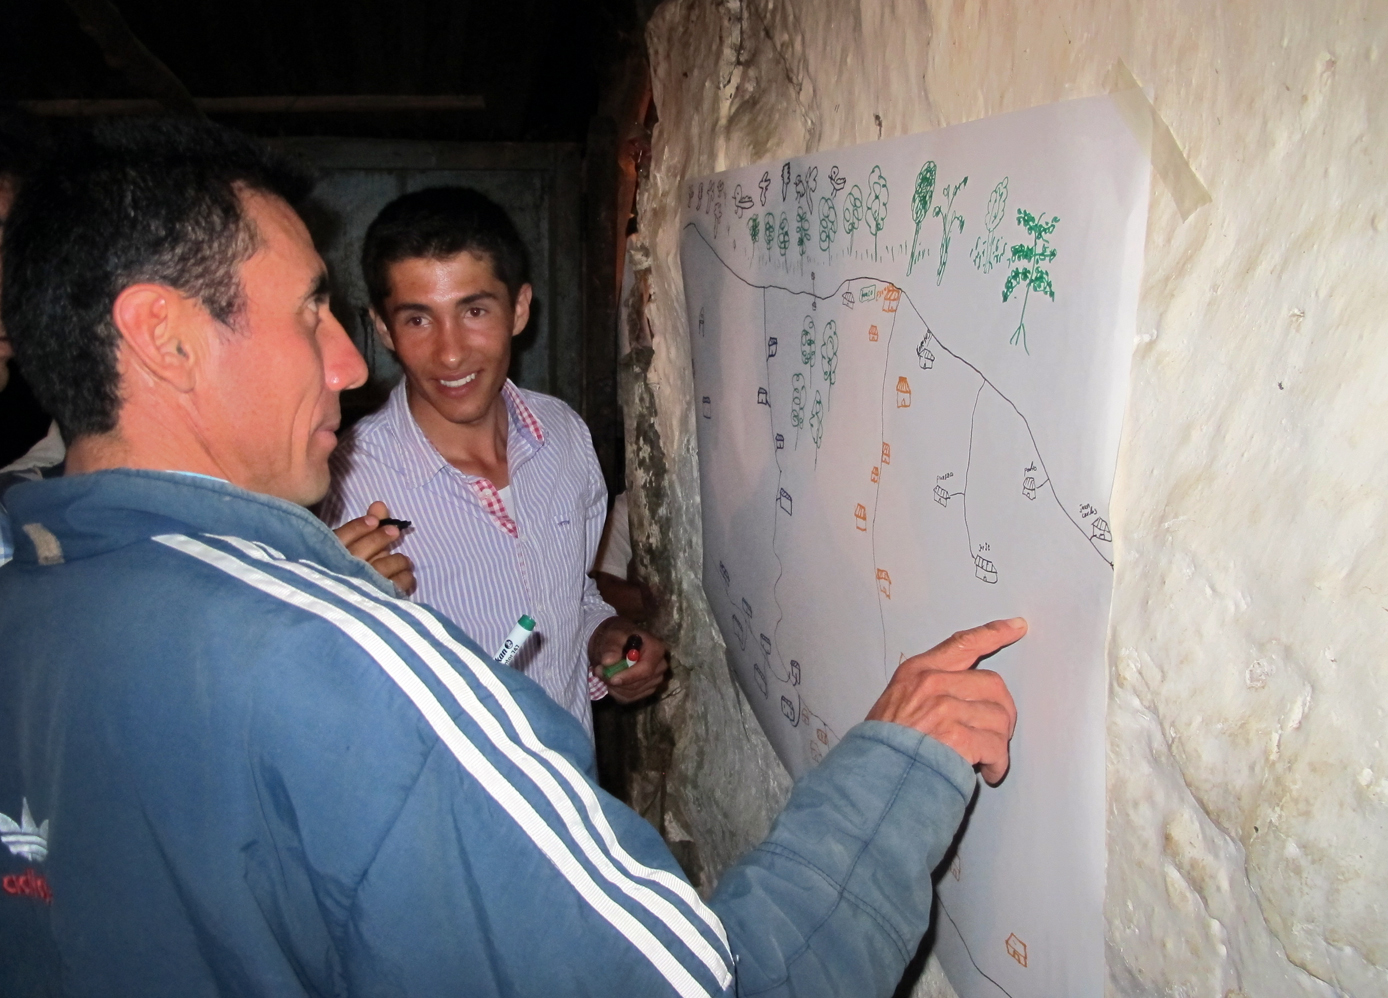 "Participants drawing a map of their territory in Macaregua village, Curití -Colombia" by Bioversity International is licensed under CC BY 2.0.